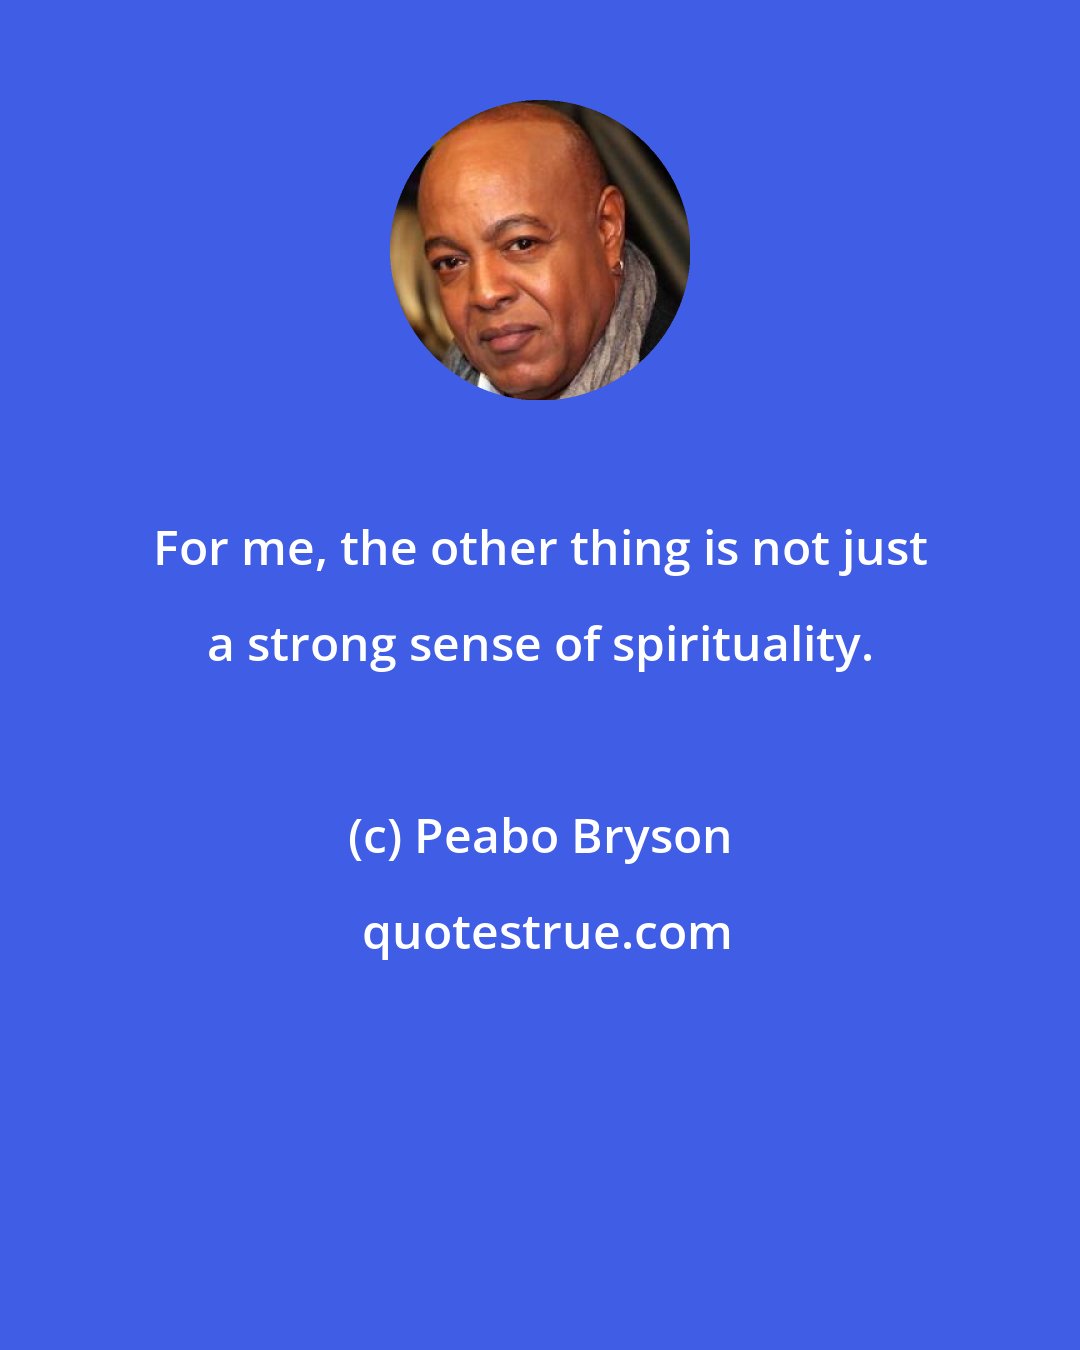 Peabo Bryson: For me, the other thing is not just a strong sense of spirituality.